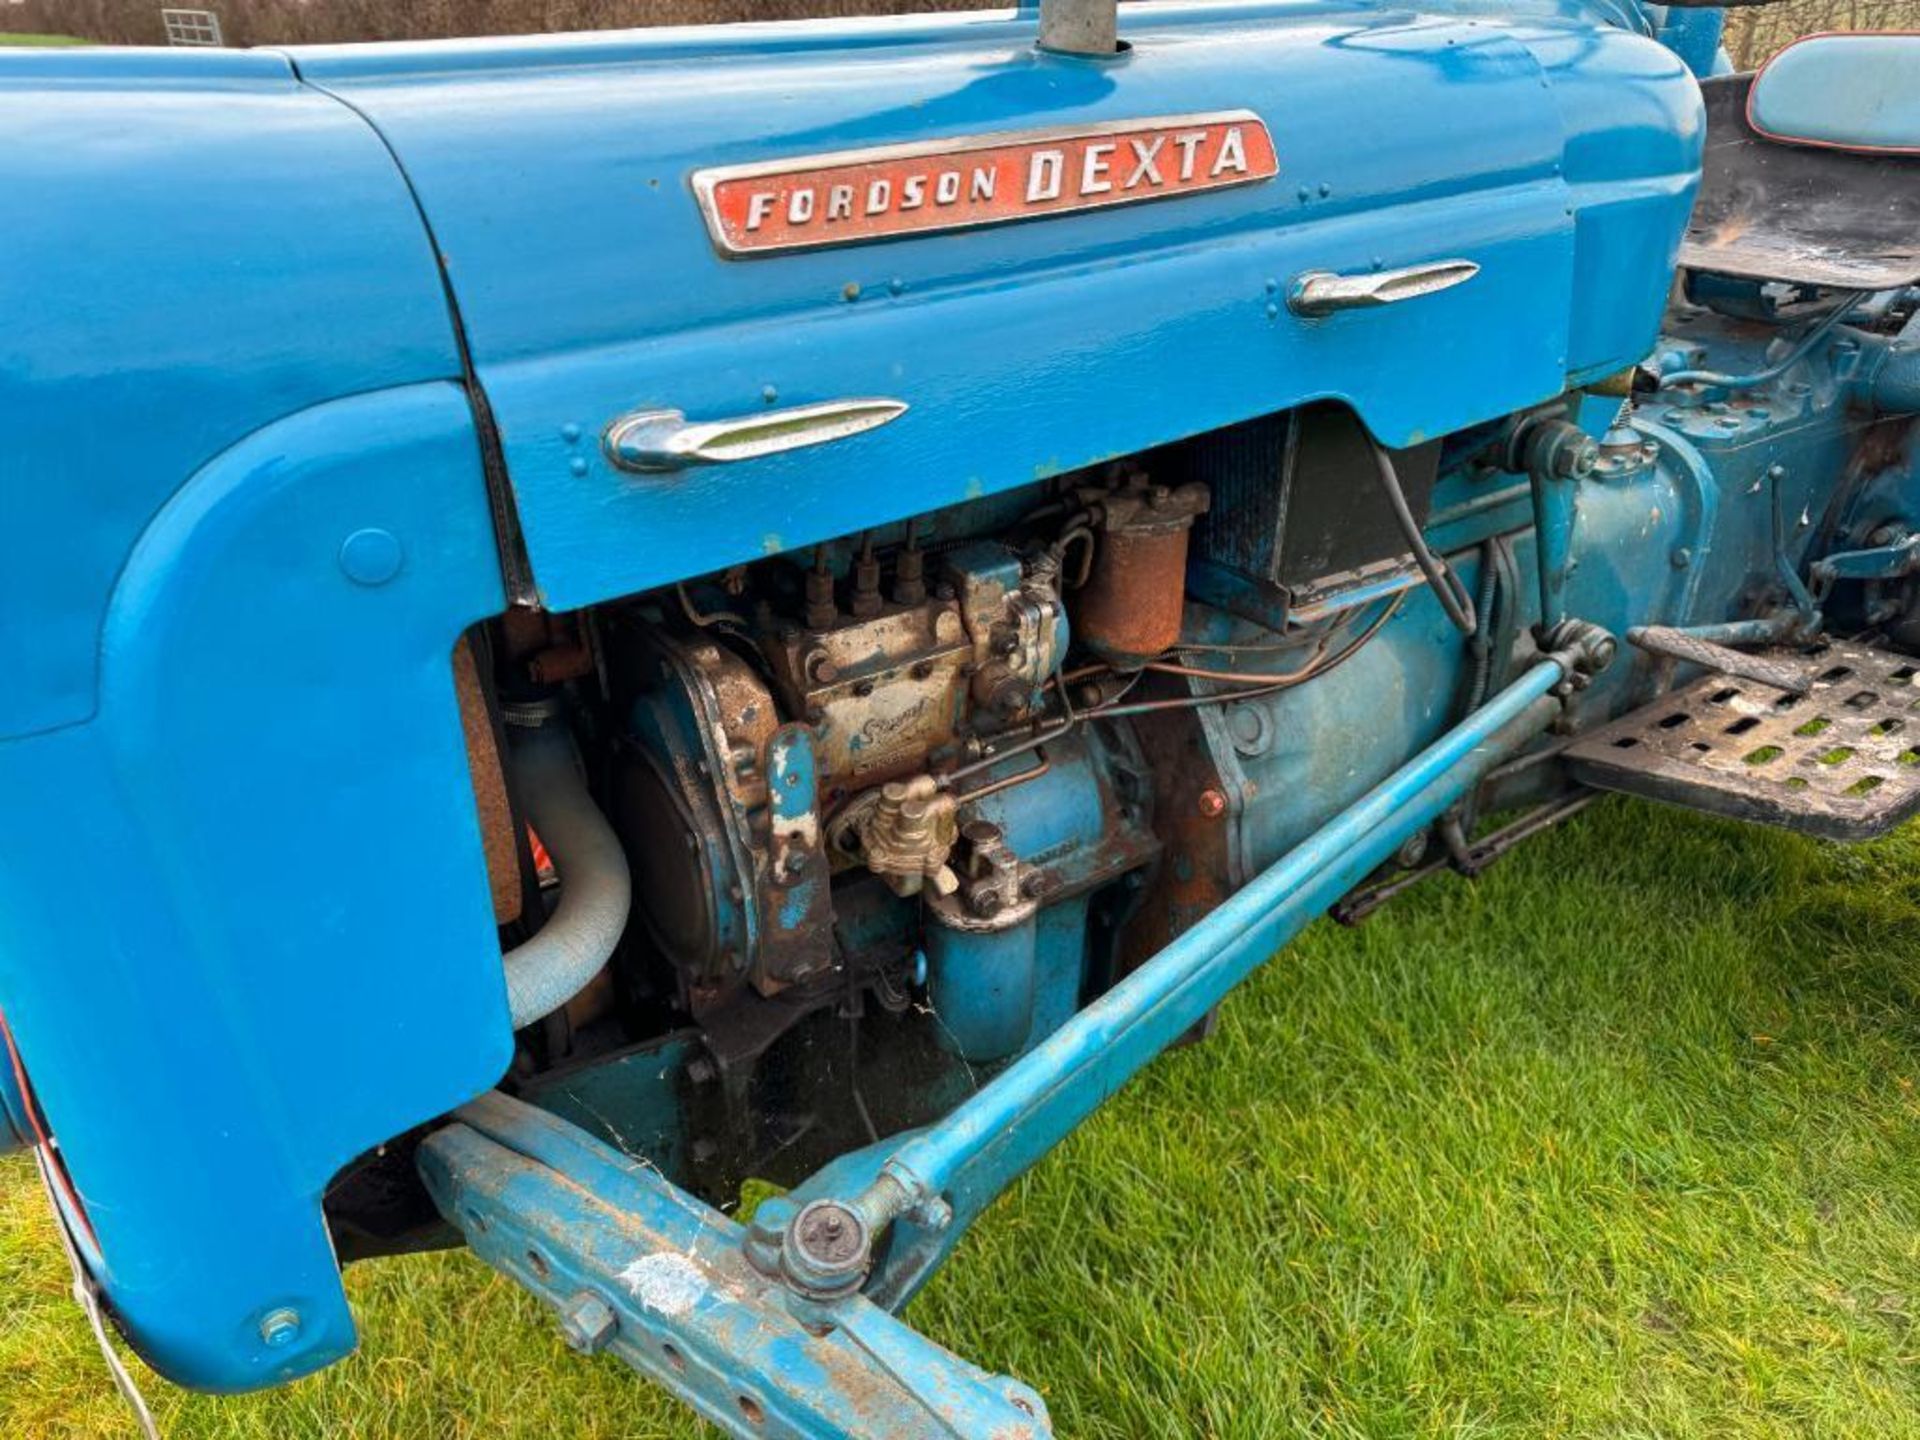 1962 Fordson Dexta 2wd diesel tractor with pick up hitch, rear linkage and rollbar on 12.4/11-28 rea - Image 4 of 14